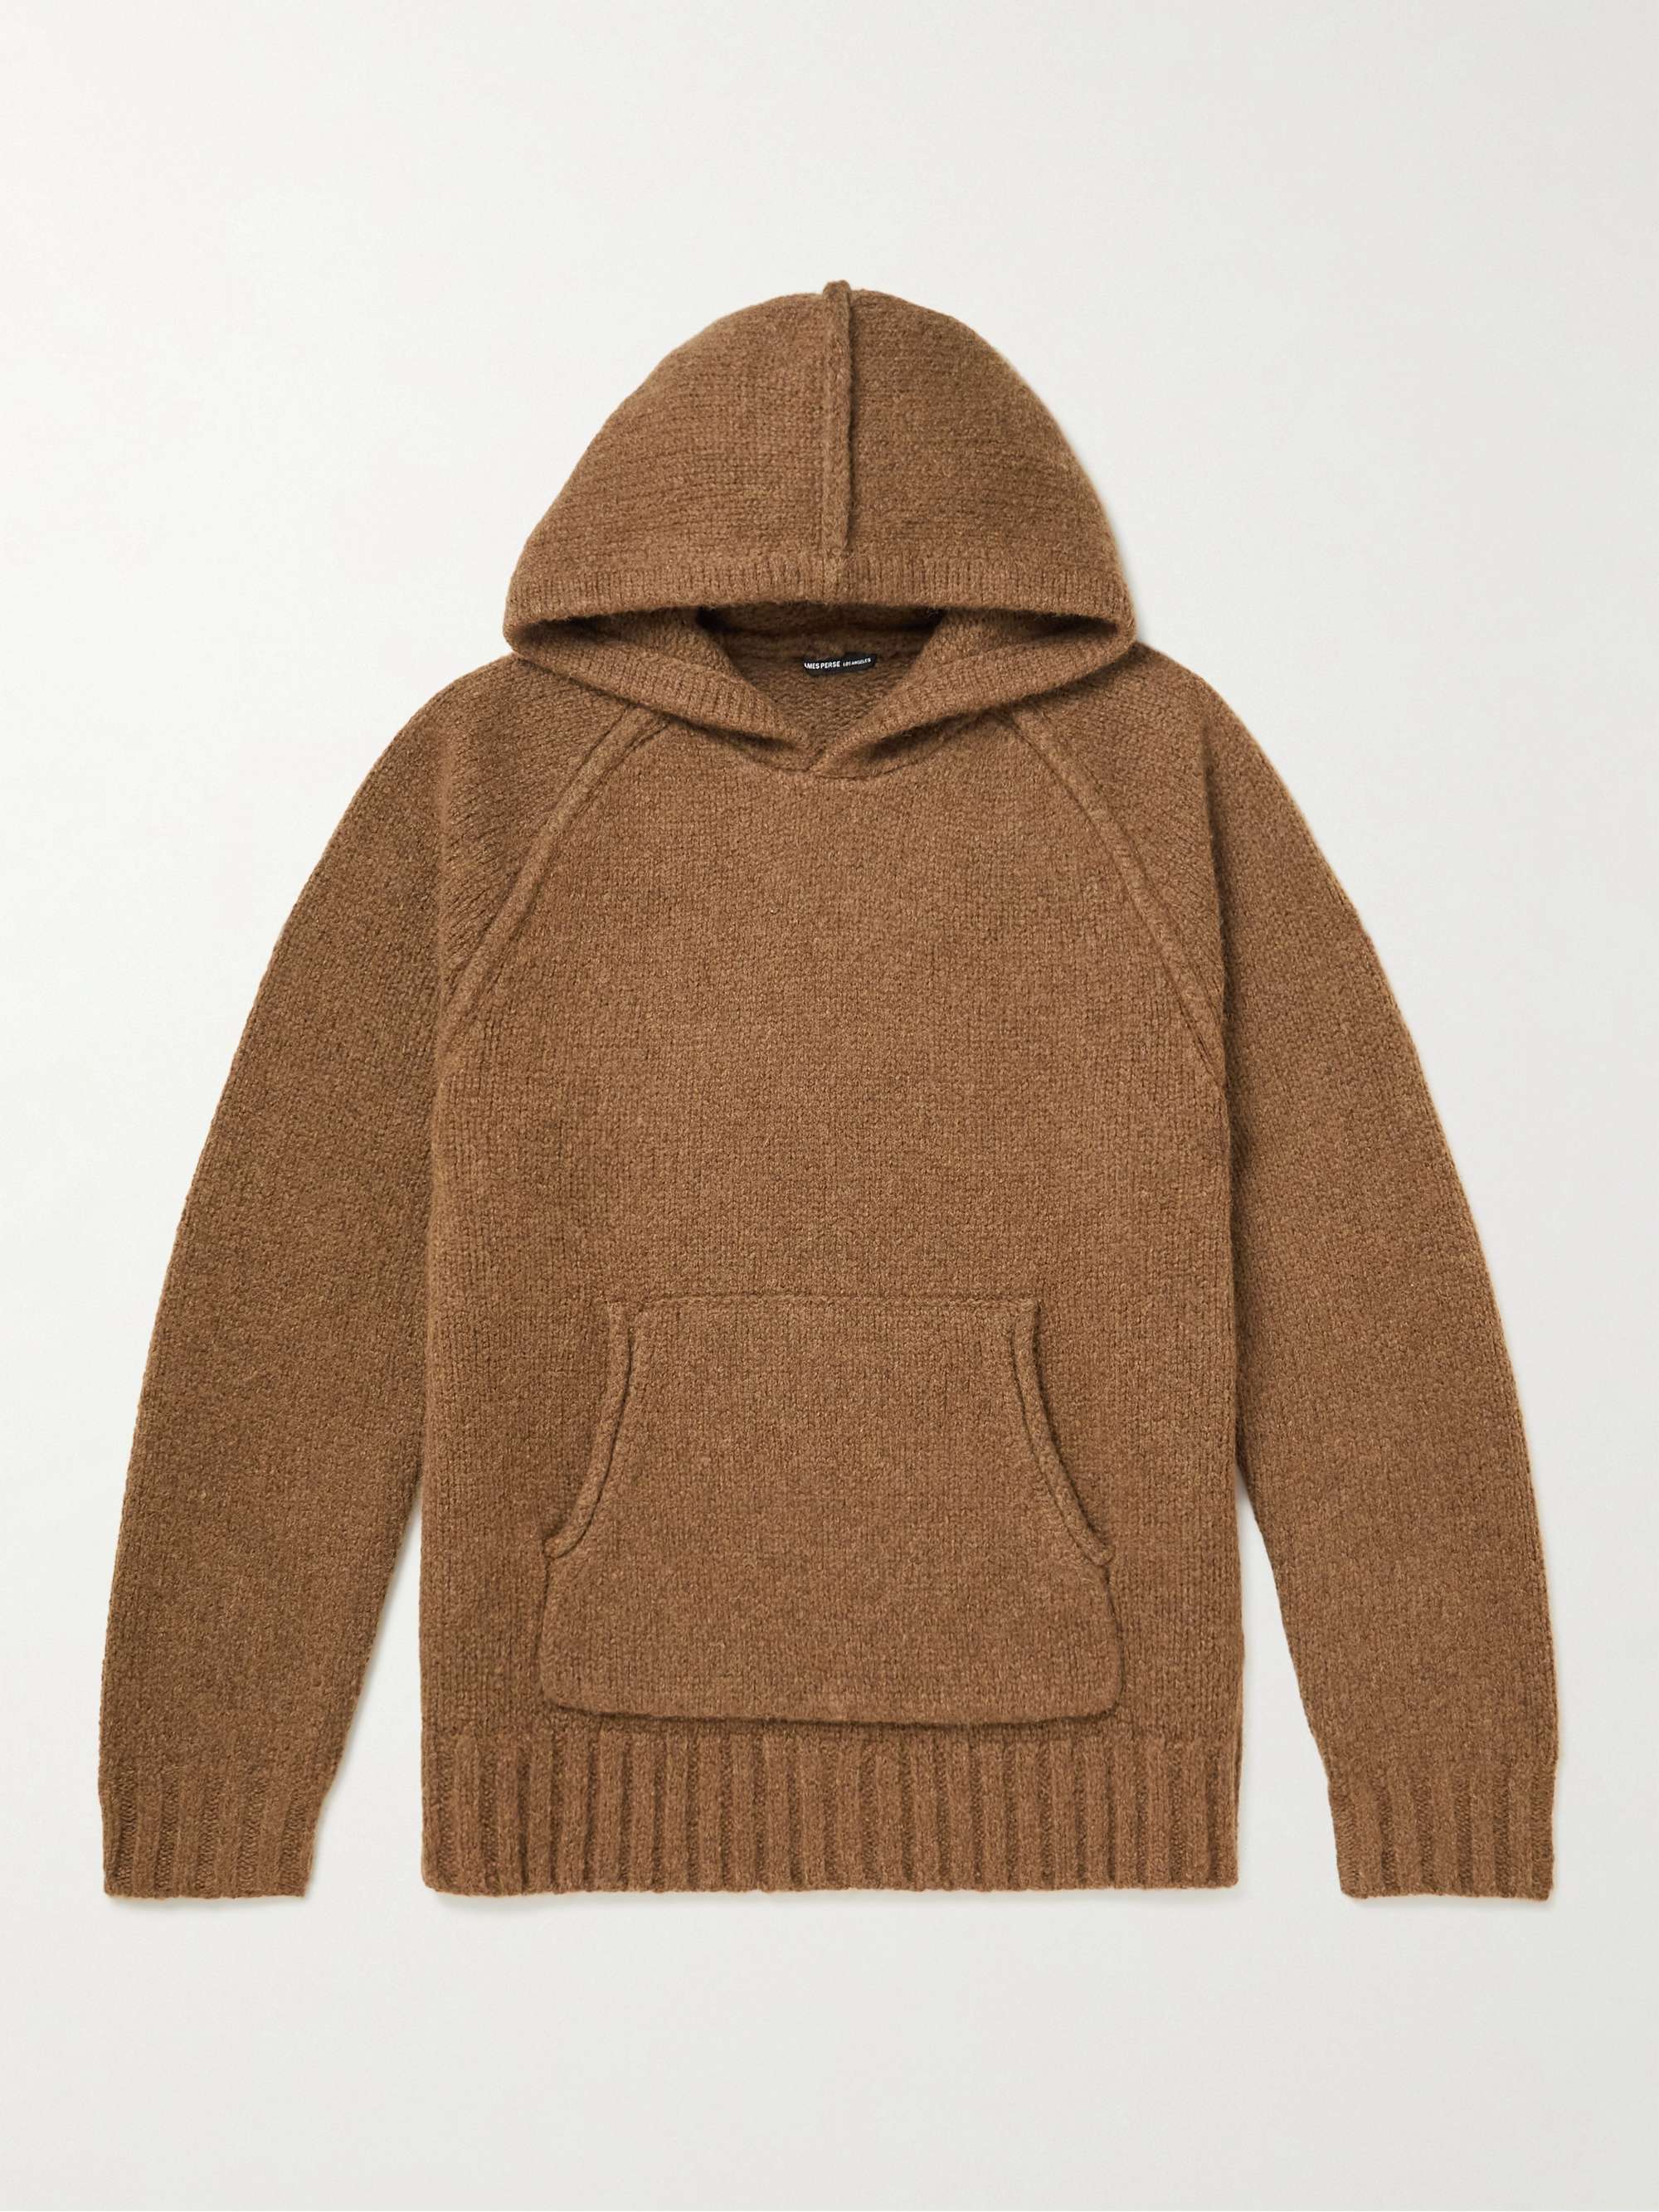 JAMES PERSE Knitted Hoodie | MR PORTER